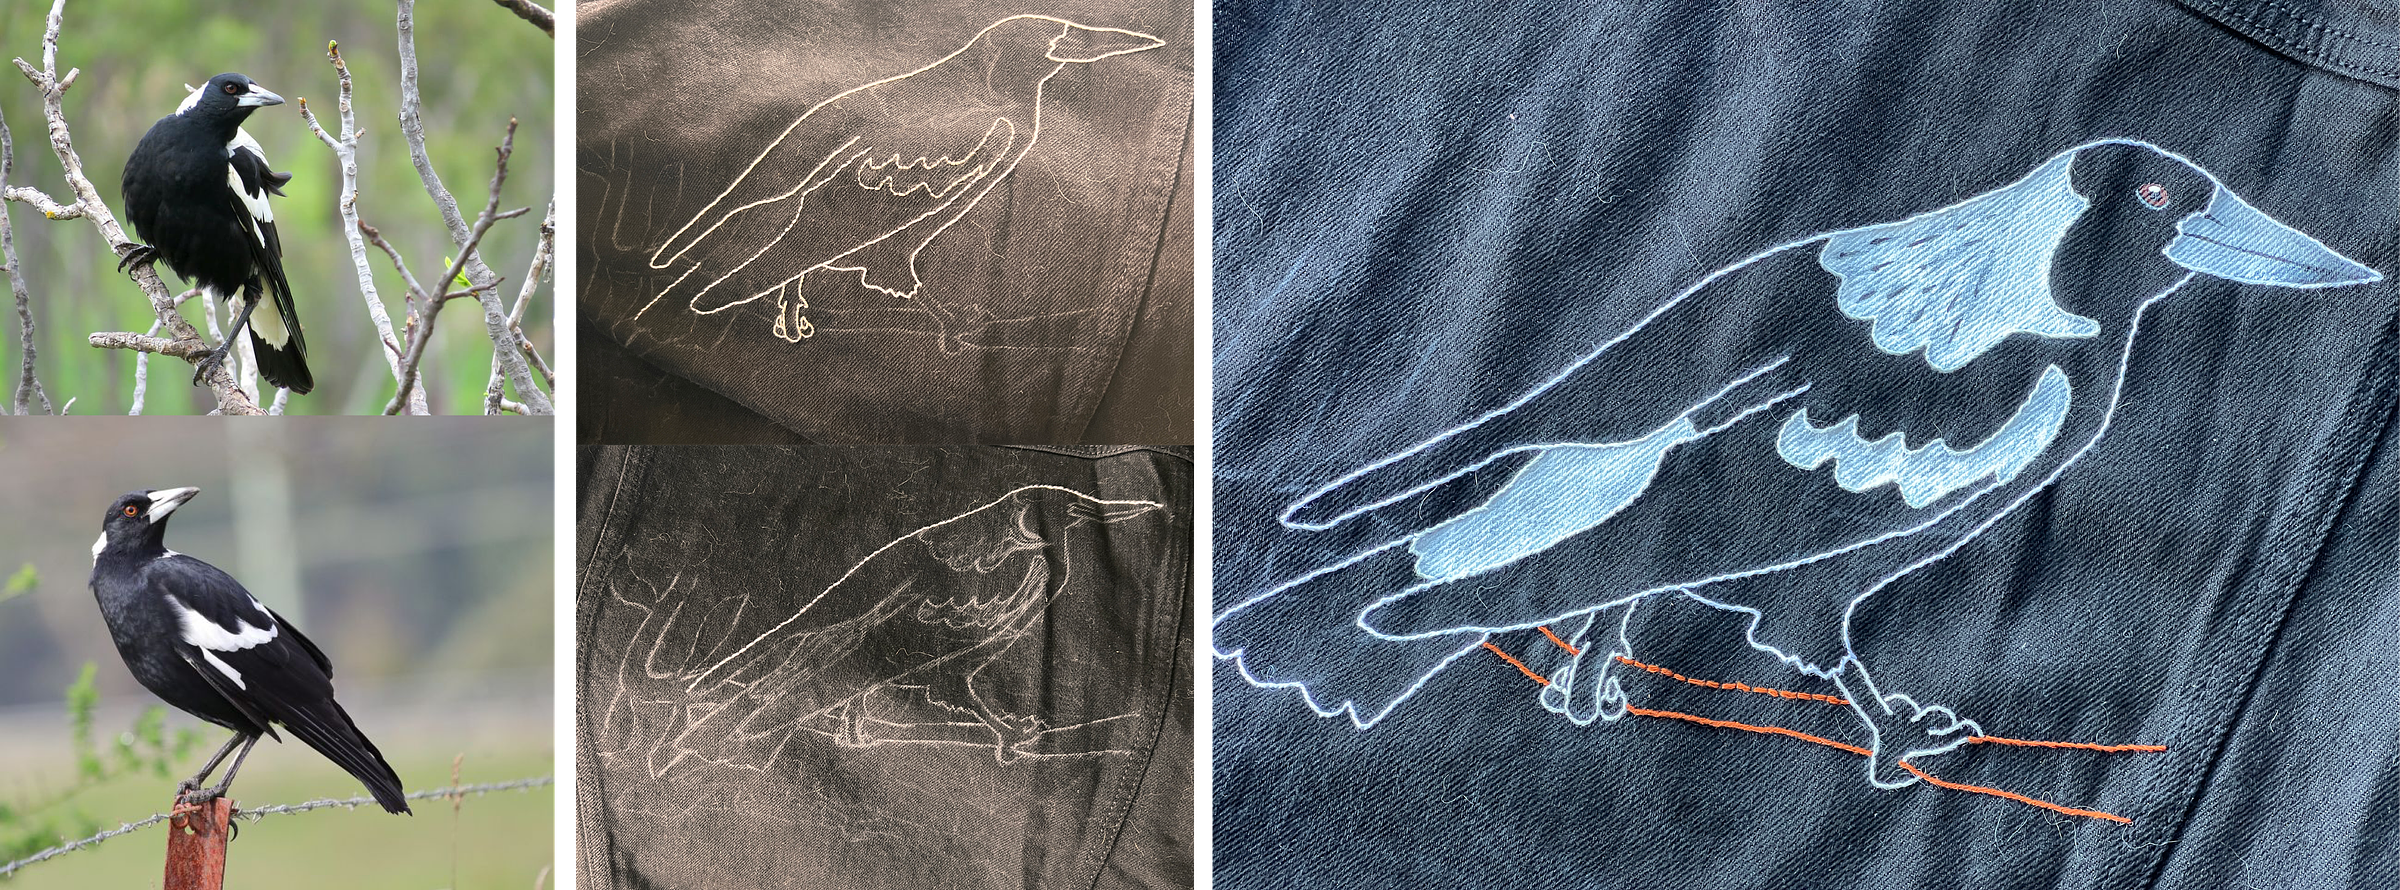 A set of five photos. The first two are photographs of Australian magpies in the wild. The second two show a sketch and embroidered outline of an Aussie magpie on a black denim surface (including a lot of cat hair!). The final and largest image shows a completed mixed-media embroidery and acrylic Australian magpie perched on a branch.